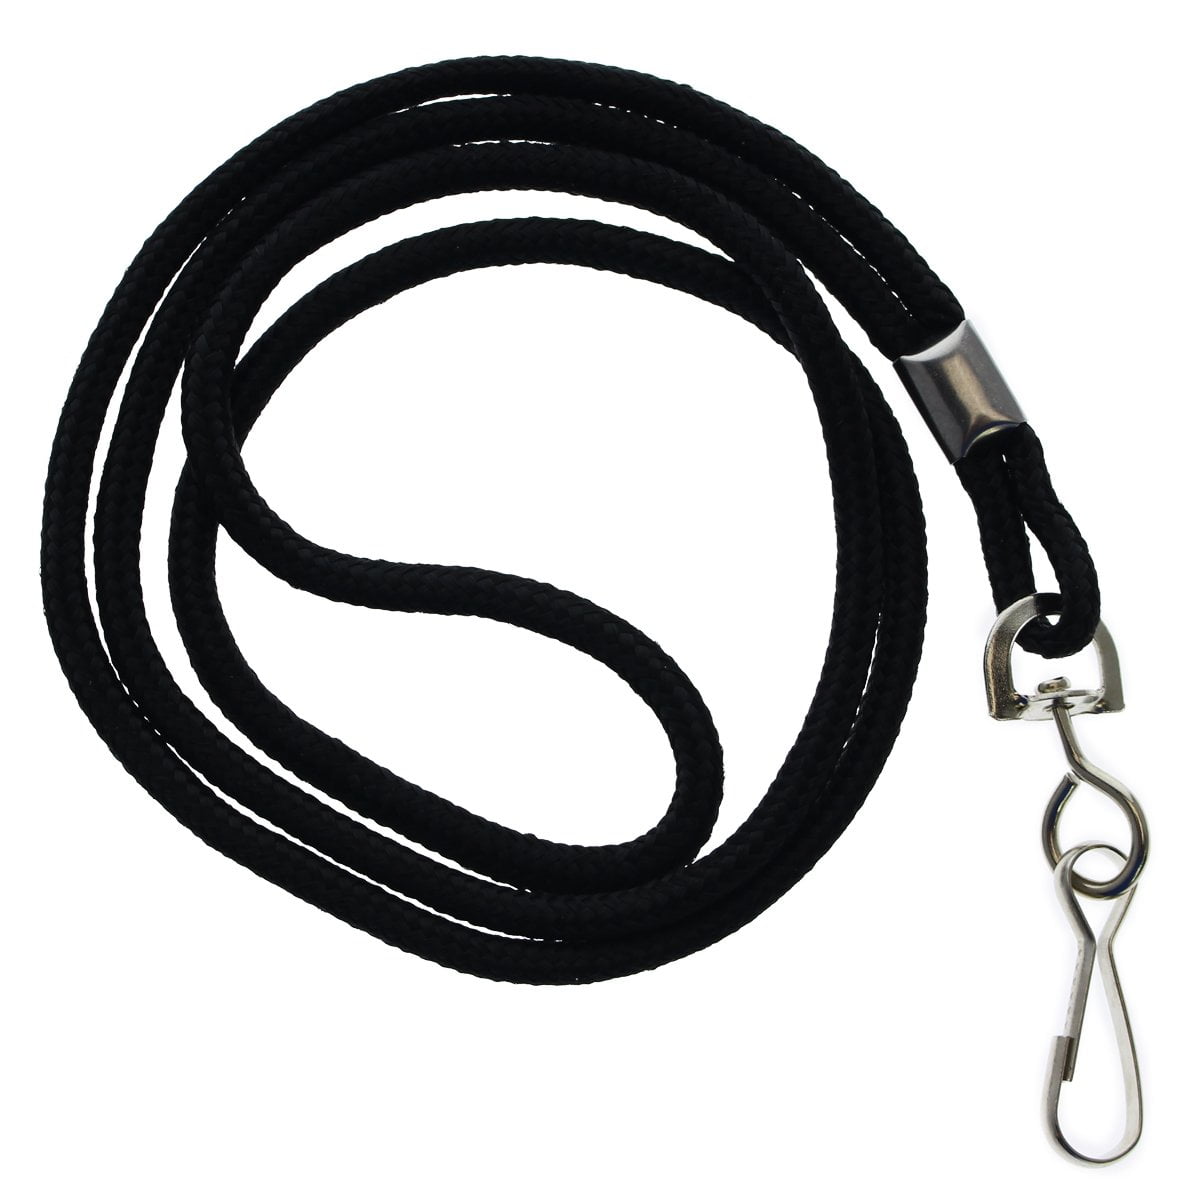 10 Black 1/8" Corded ID Badge Neck Lanyards with Nickle swivel hook 36" Round 